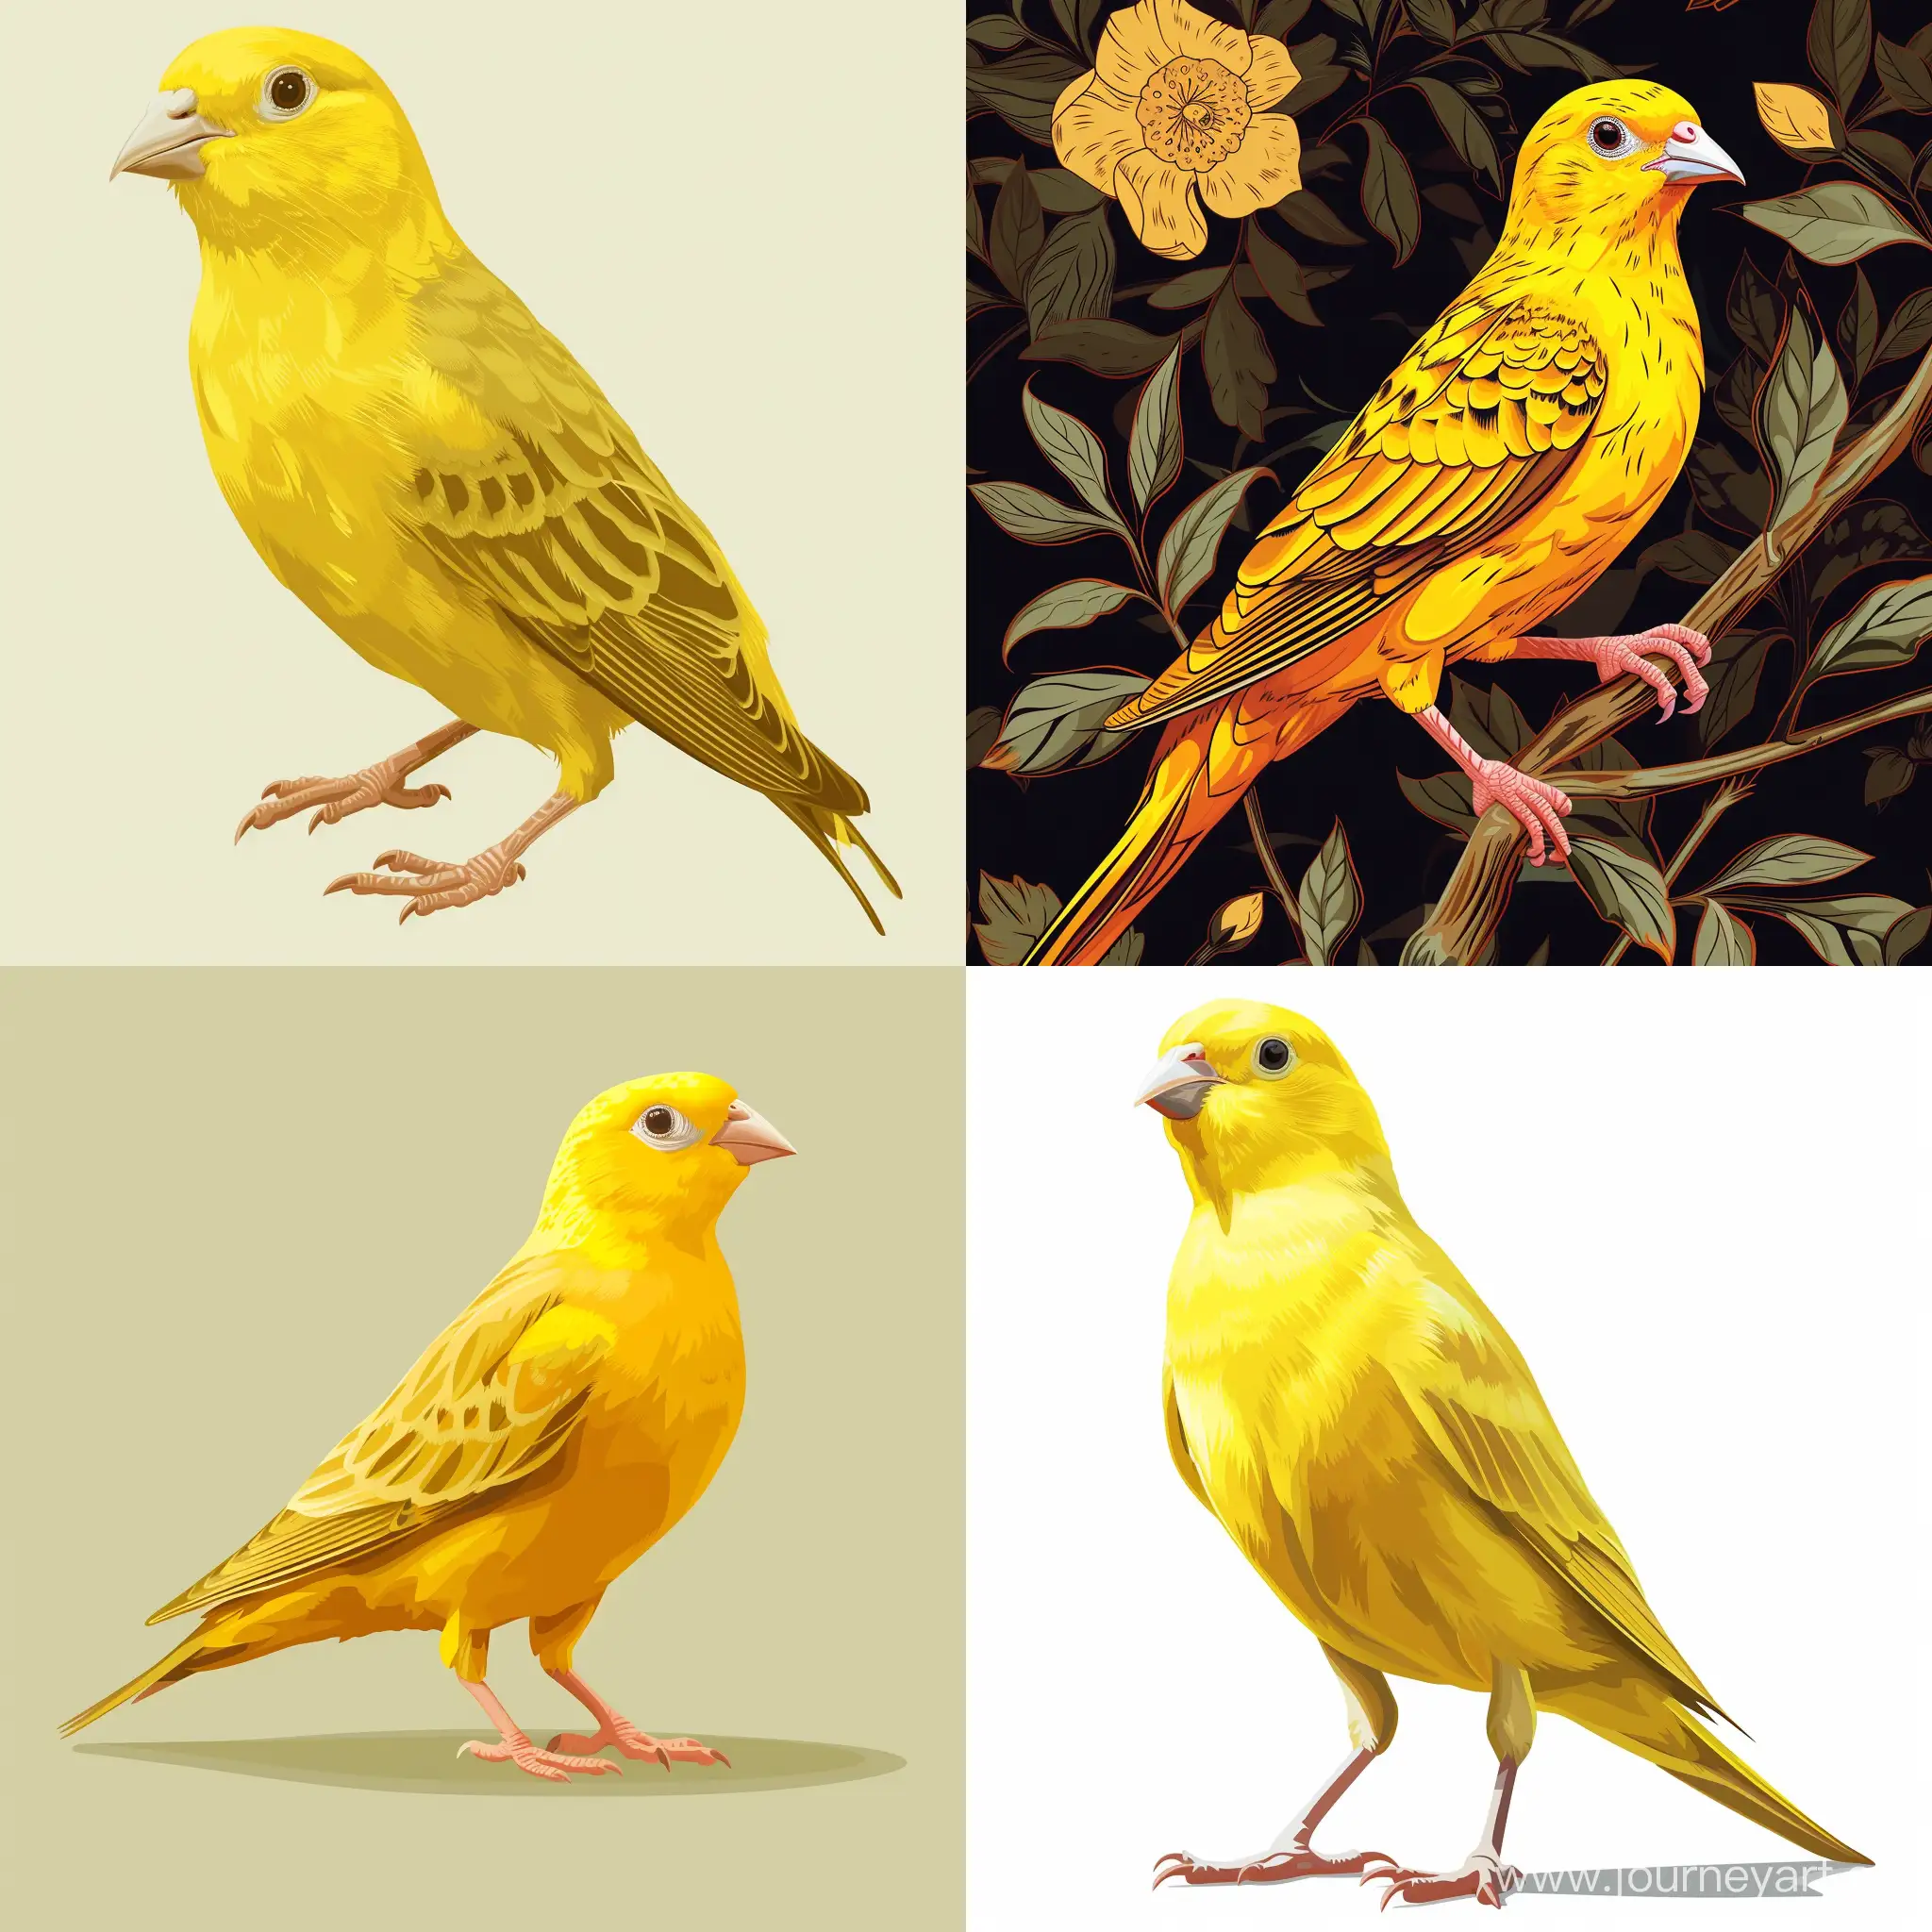 personification of an Atlantic Canary, vector style, high quality details